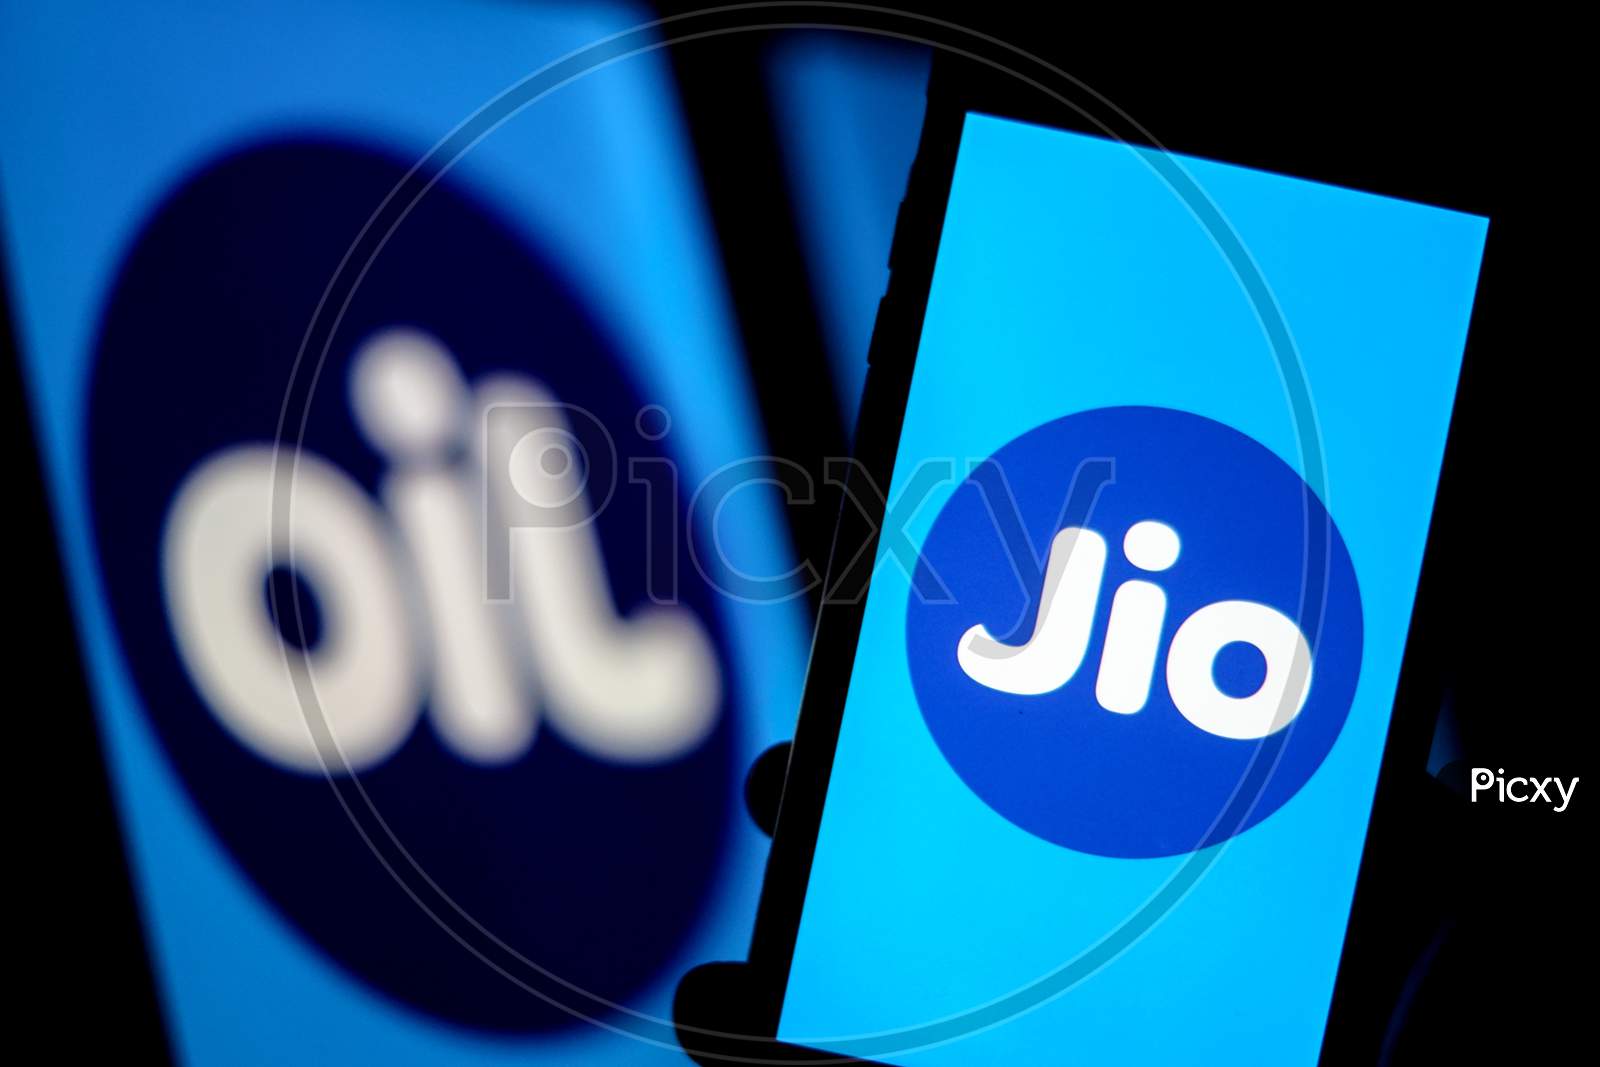 Jio Logo in a Smartphone with Flipped Jio Logo as OIL in the Background